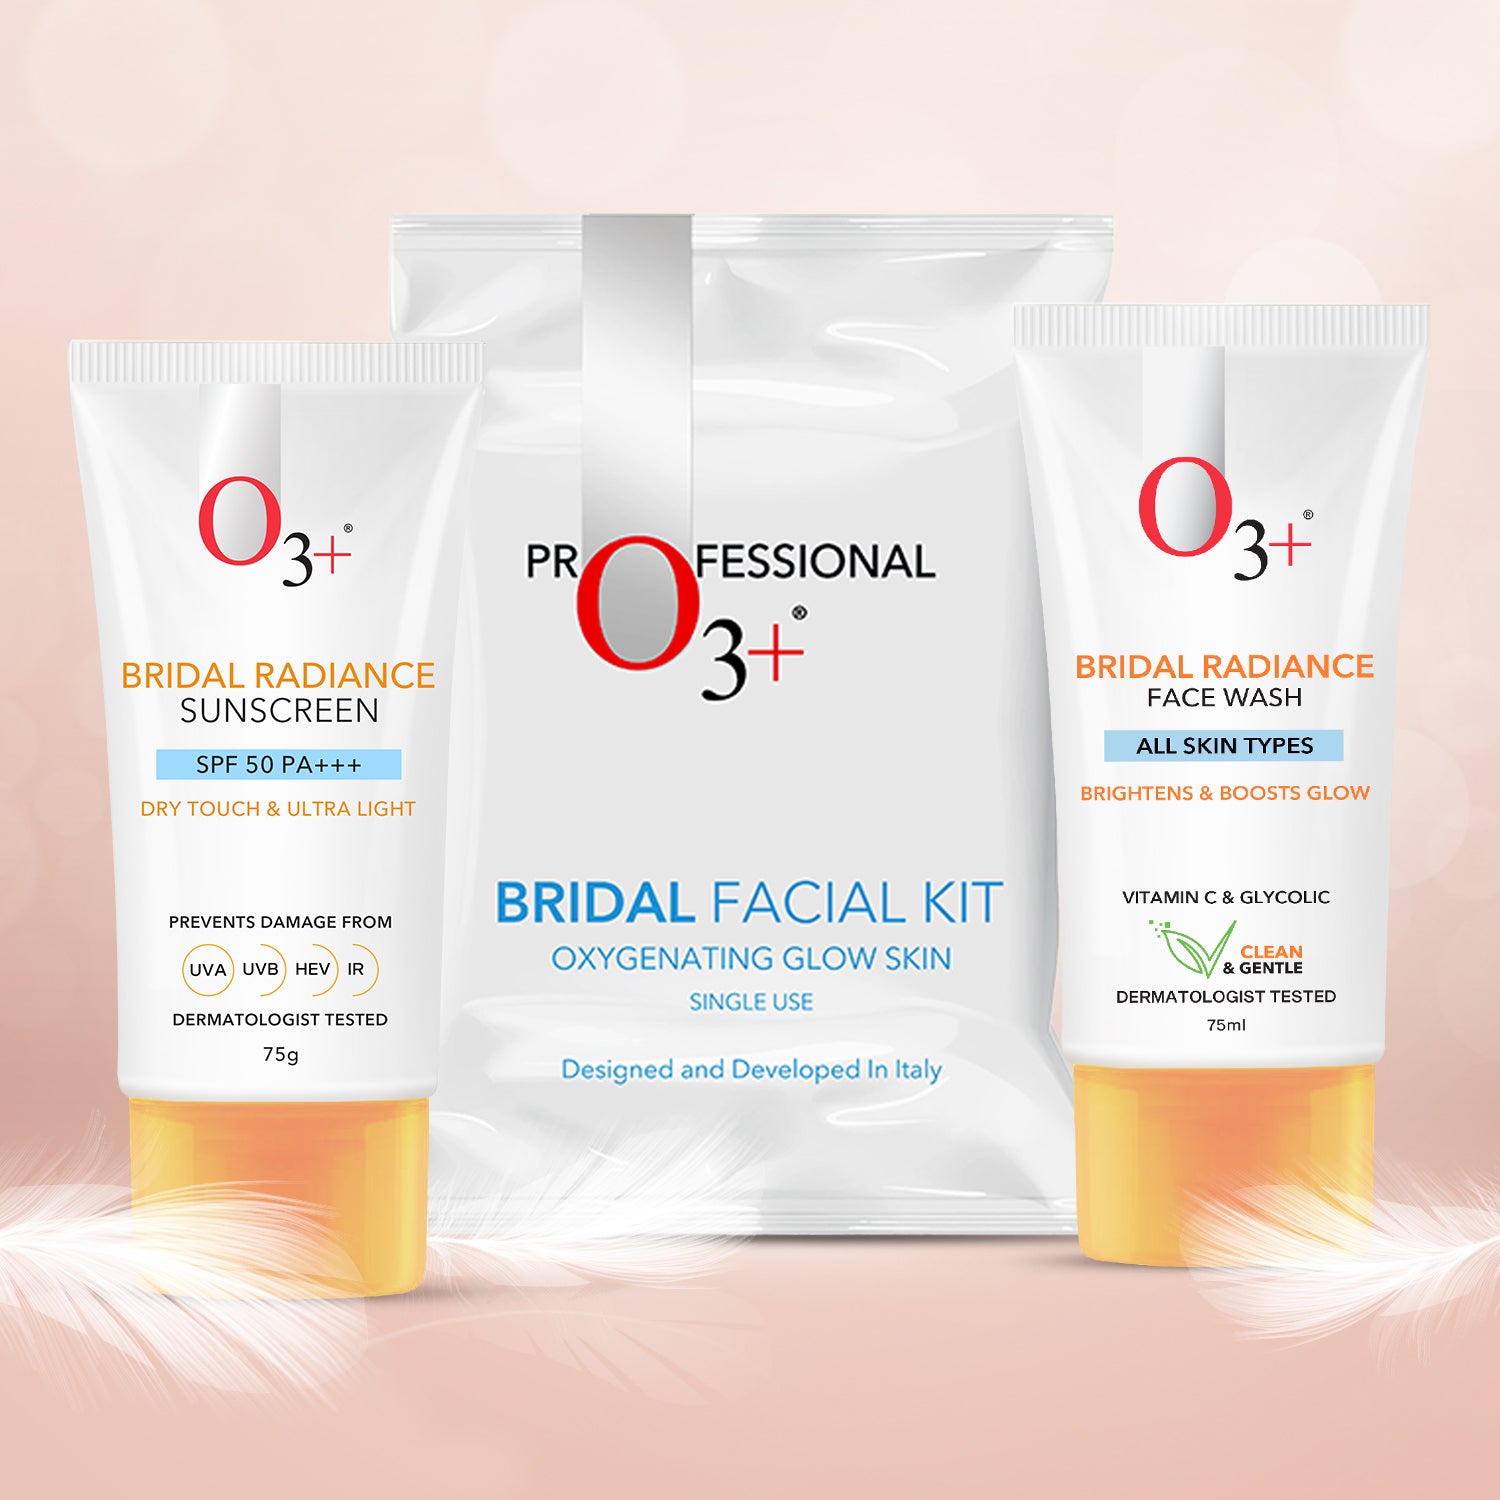 Skincare Combo With  Bridal Facial Kit Oxygenating Glow Skin 81g,Radiance Facewash For Brightens Glow 75g & UVA UVB Ultra Light Sunscreen With SPF50 PA+++ 75g